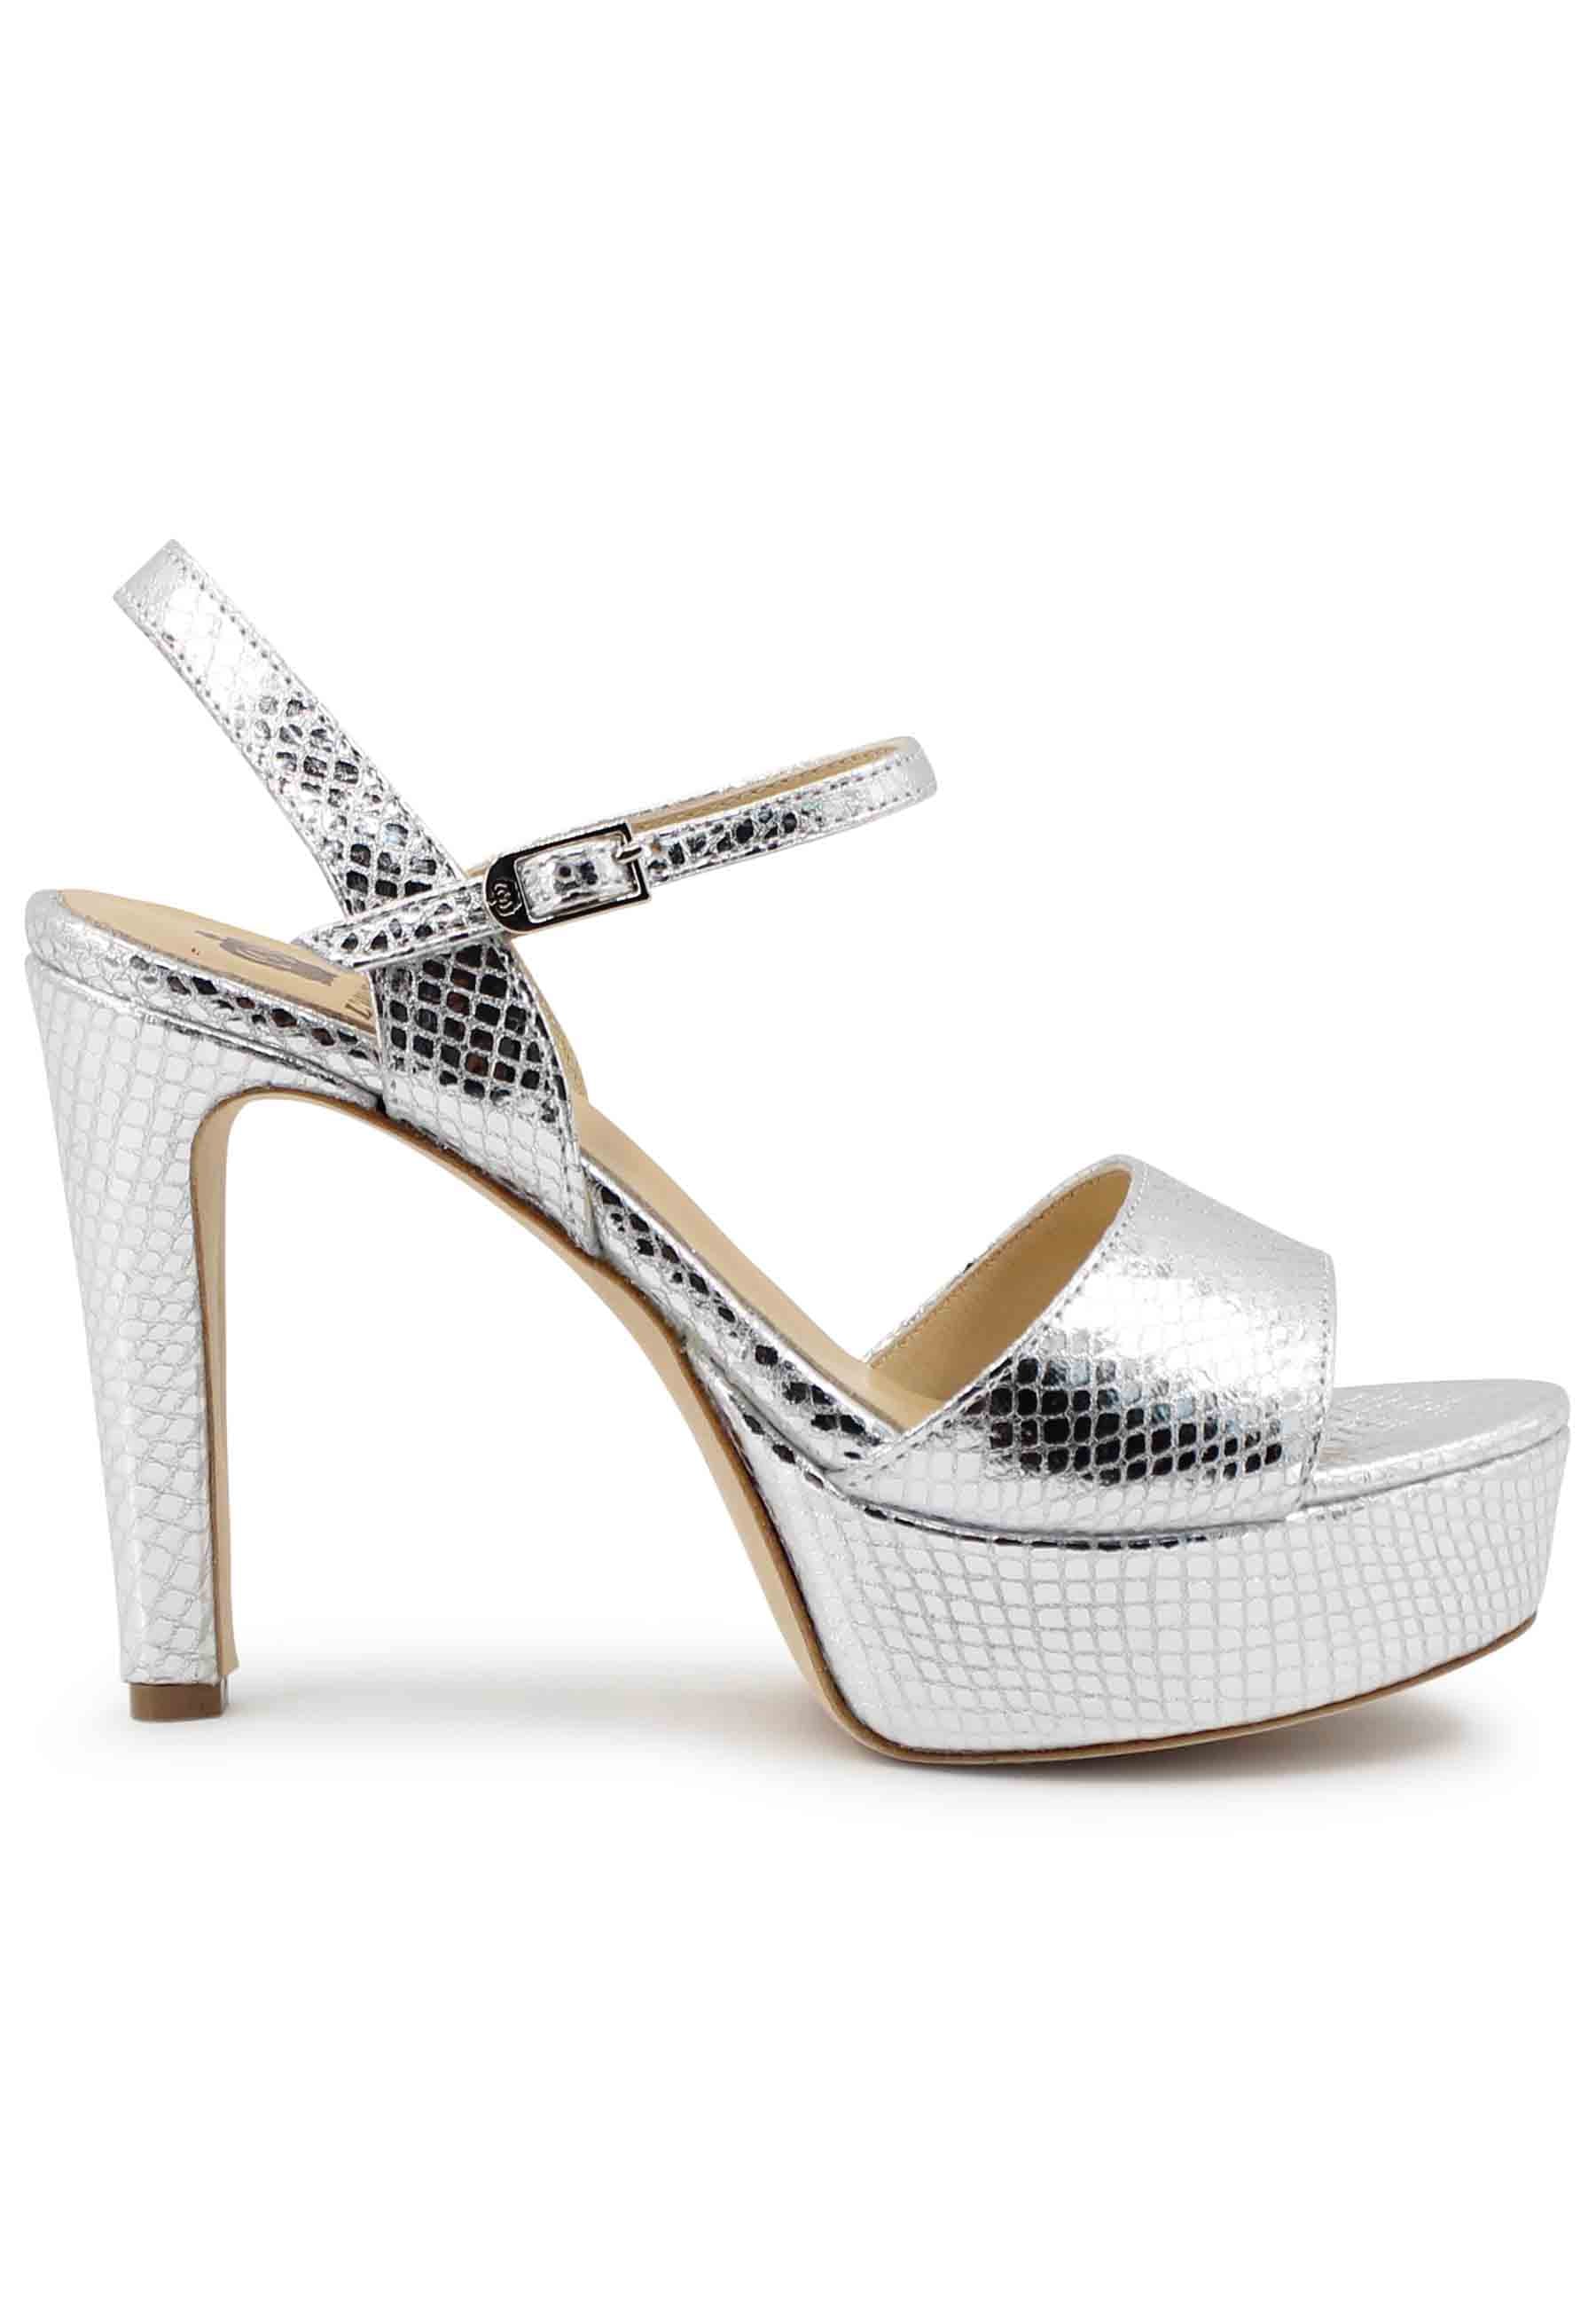 Women's sandals in silver printed laminated leather with high heel and platform